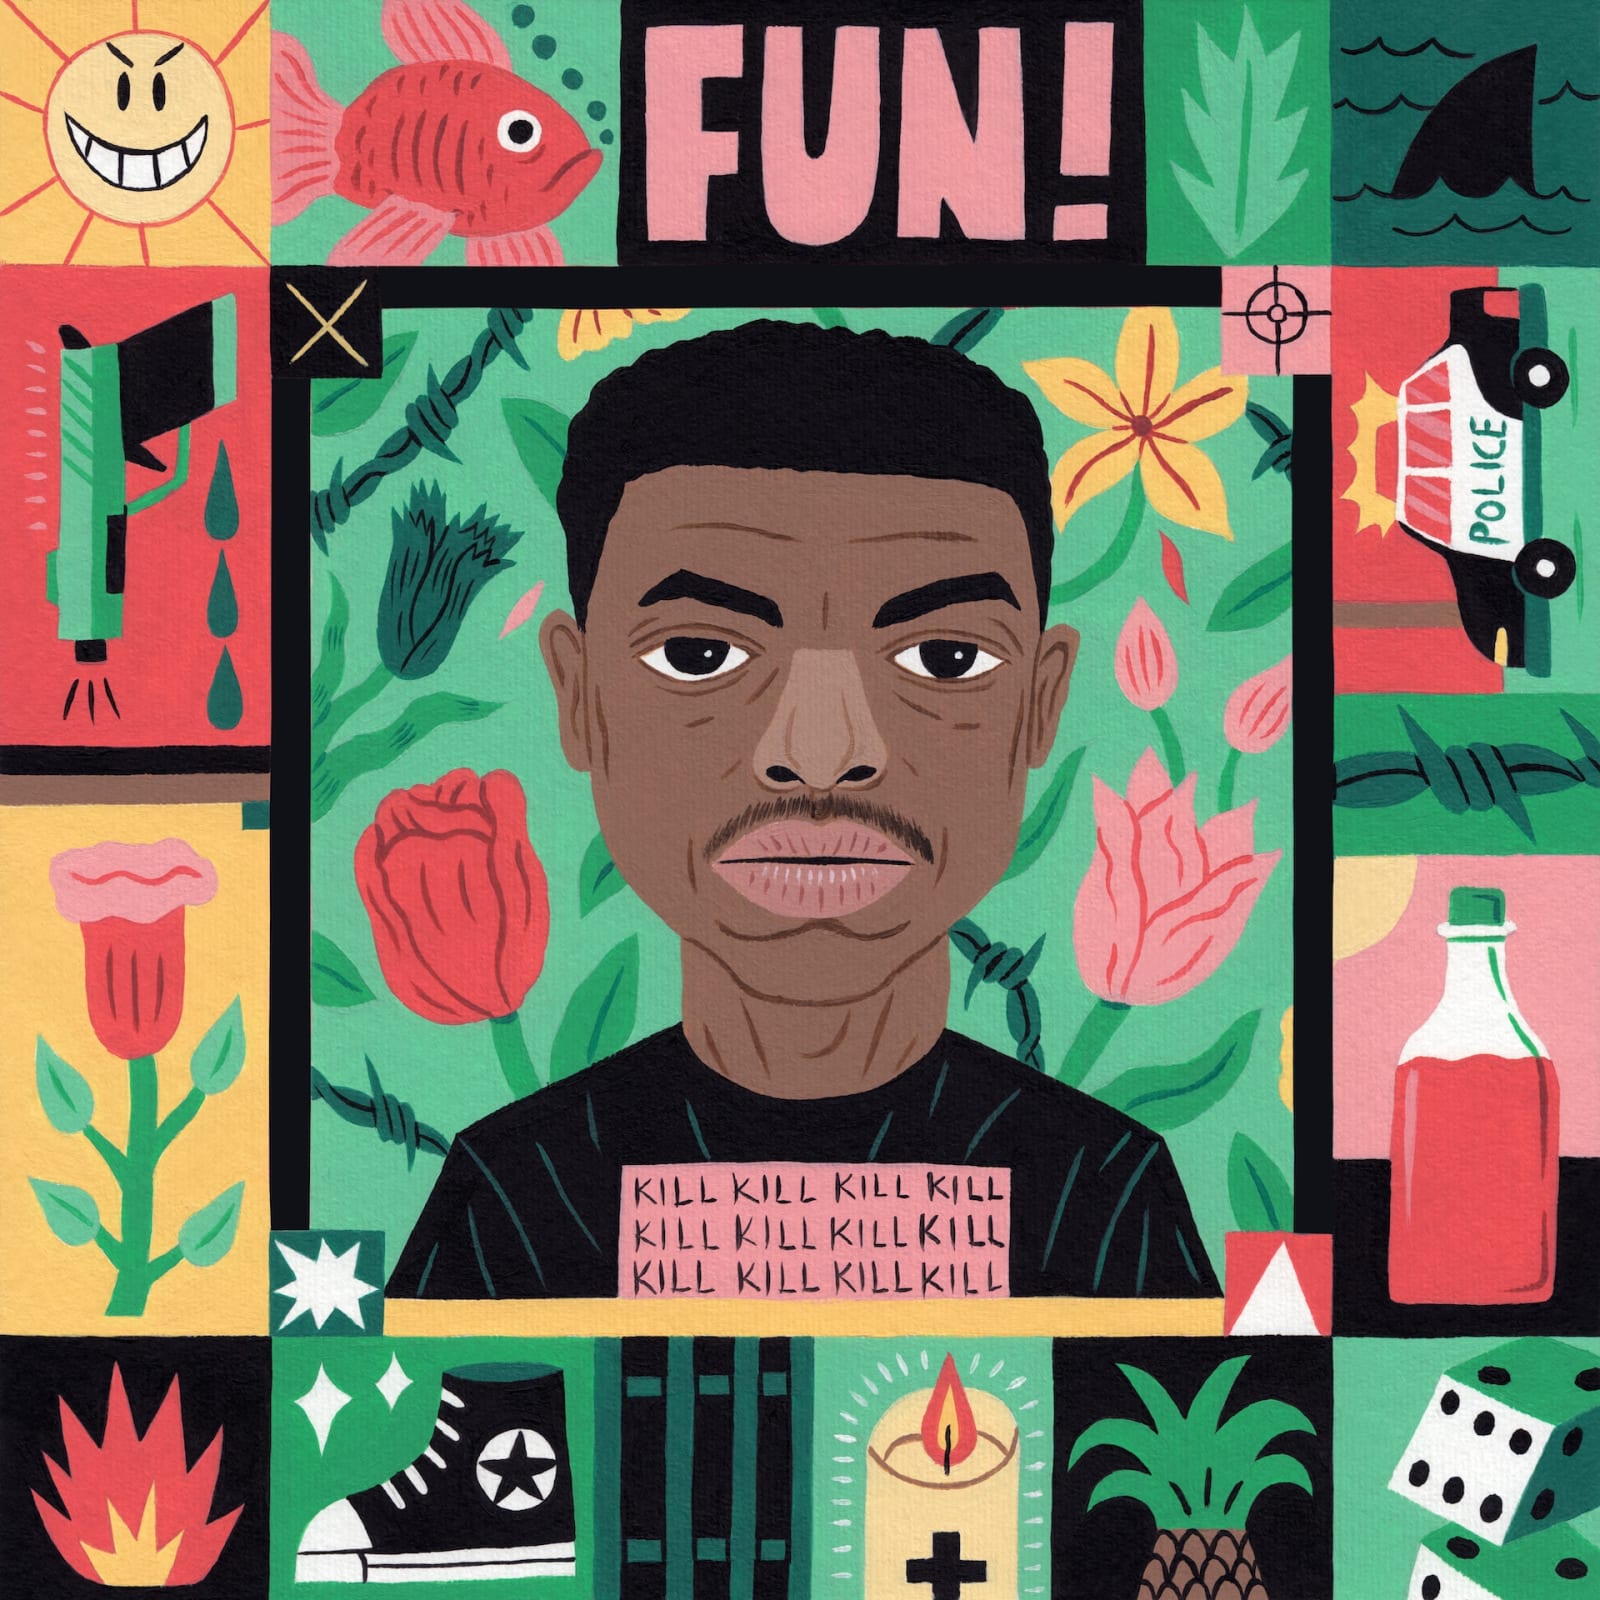 Vince Staples, 2019, acrylic on paper, 30 x 30 cm, SOLD